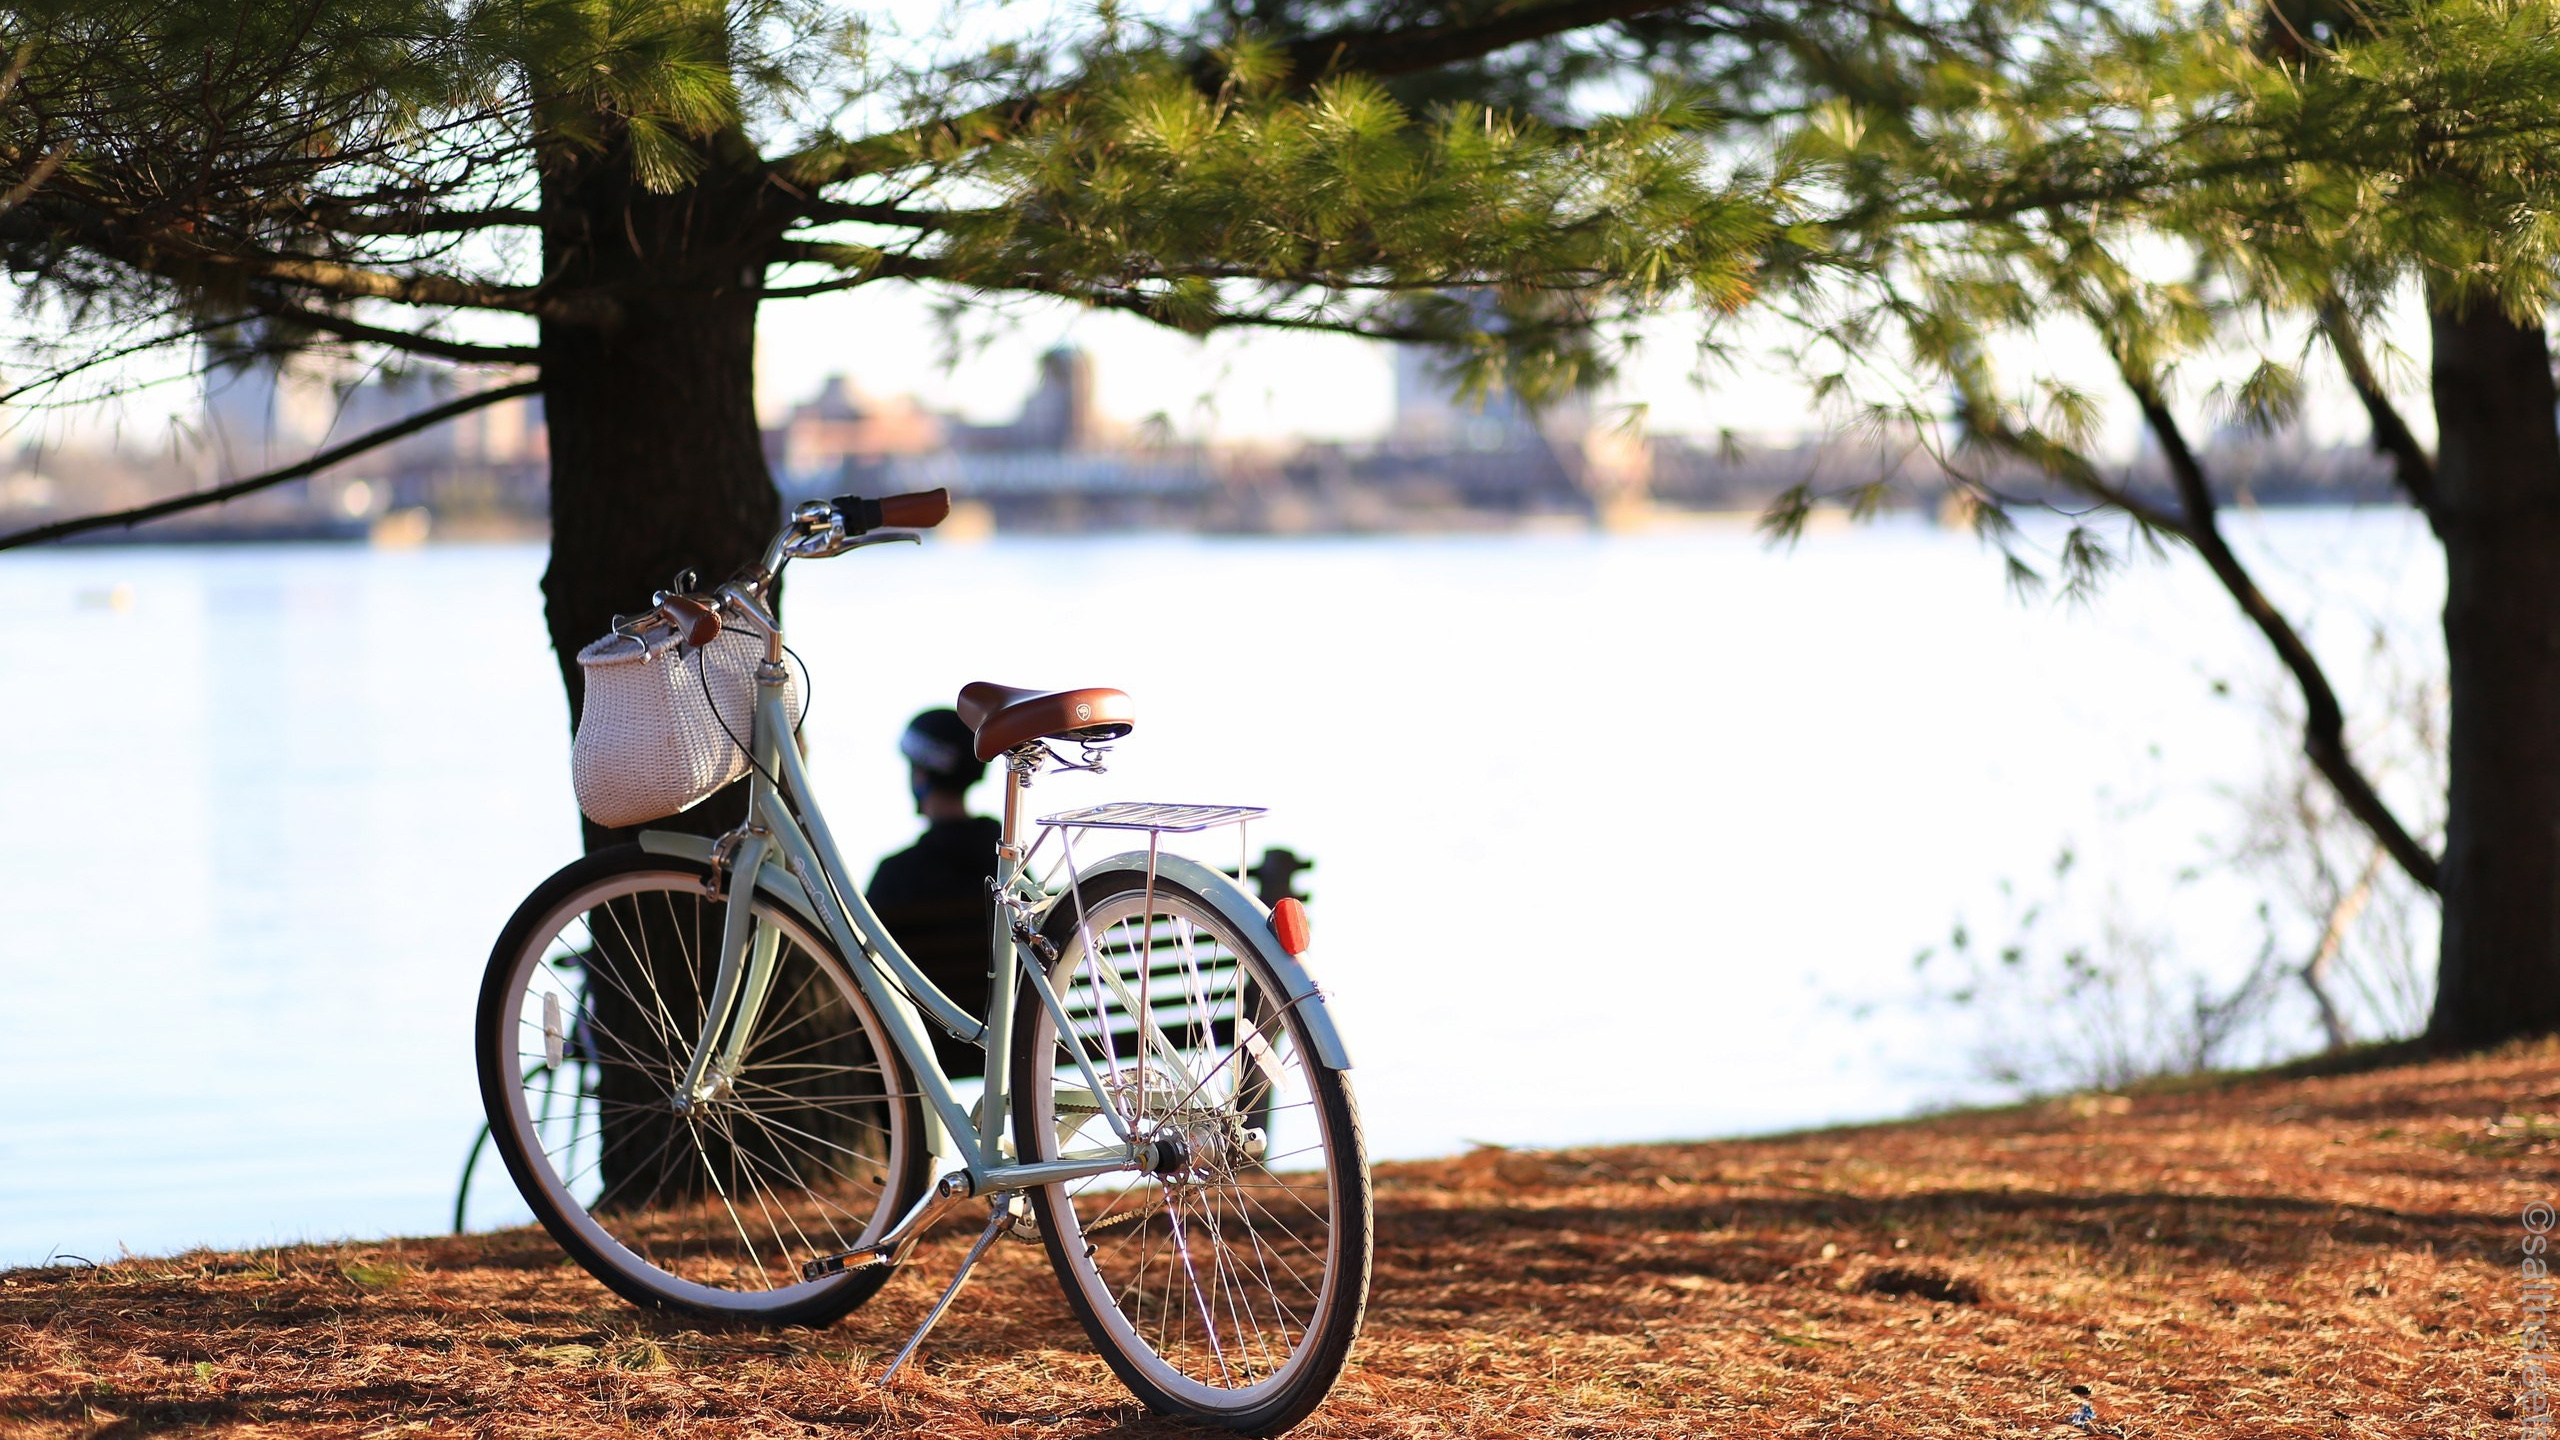 White City Bike on Brown Sand Near Body of Water During Daytime. Wallpaper in 2560x1440 Resolution